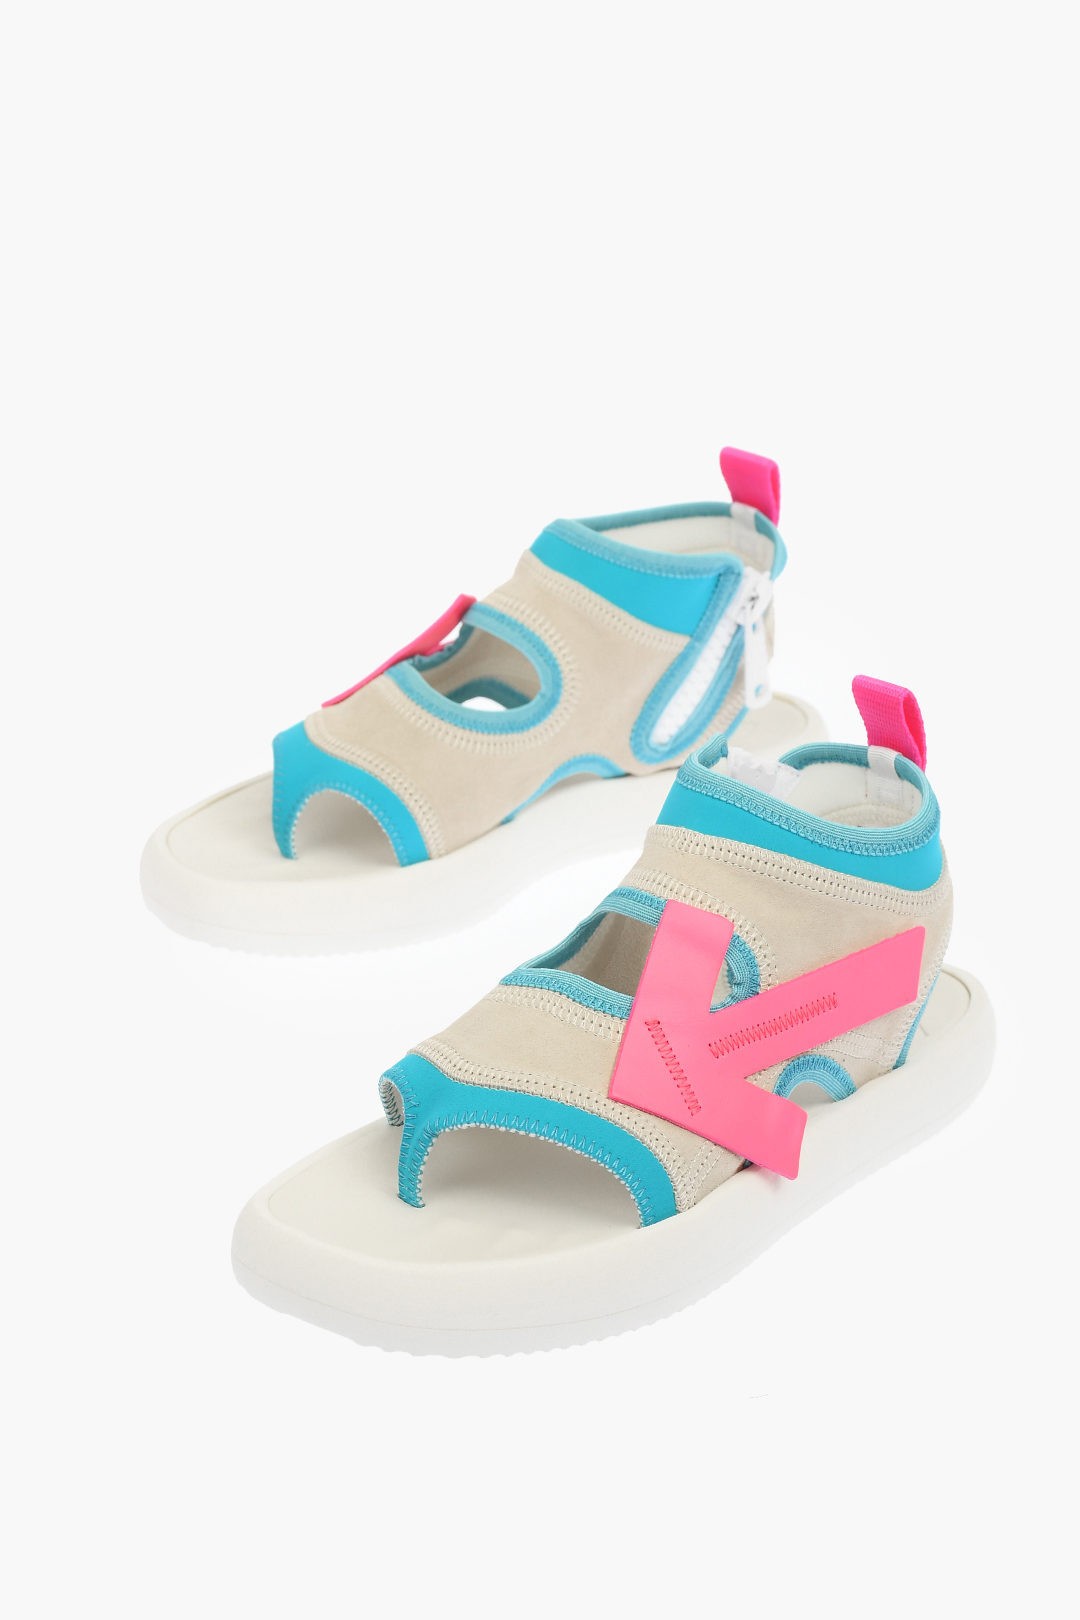 OFF WHITE オフホワイト Multicolor フラットシューズ OWIA206R20H631110128 レディース FLUO ARROW SUEDE SURF THONG SANDALS 【関税・送料無料】【ラッピング無料】 dk